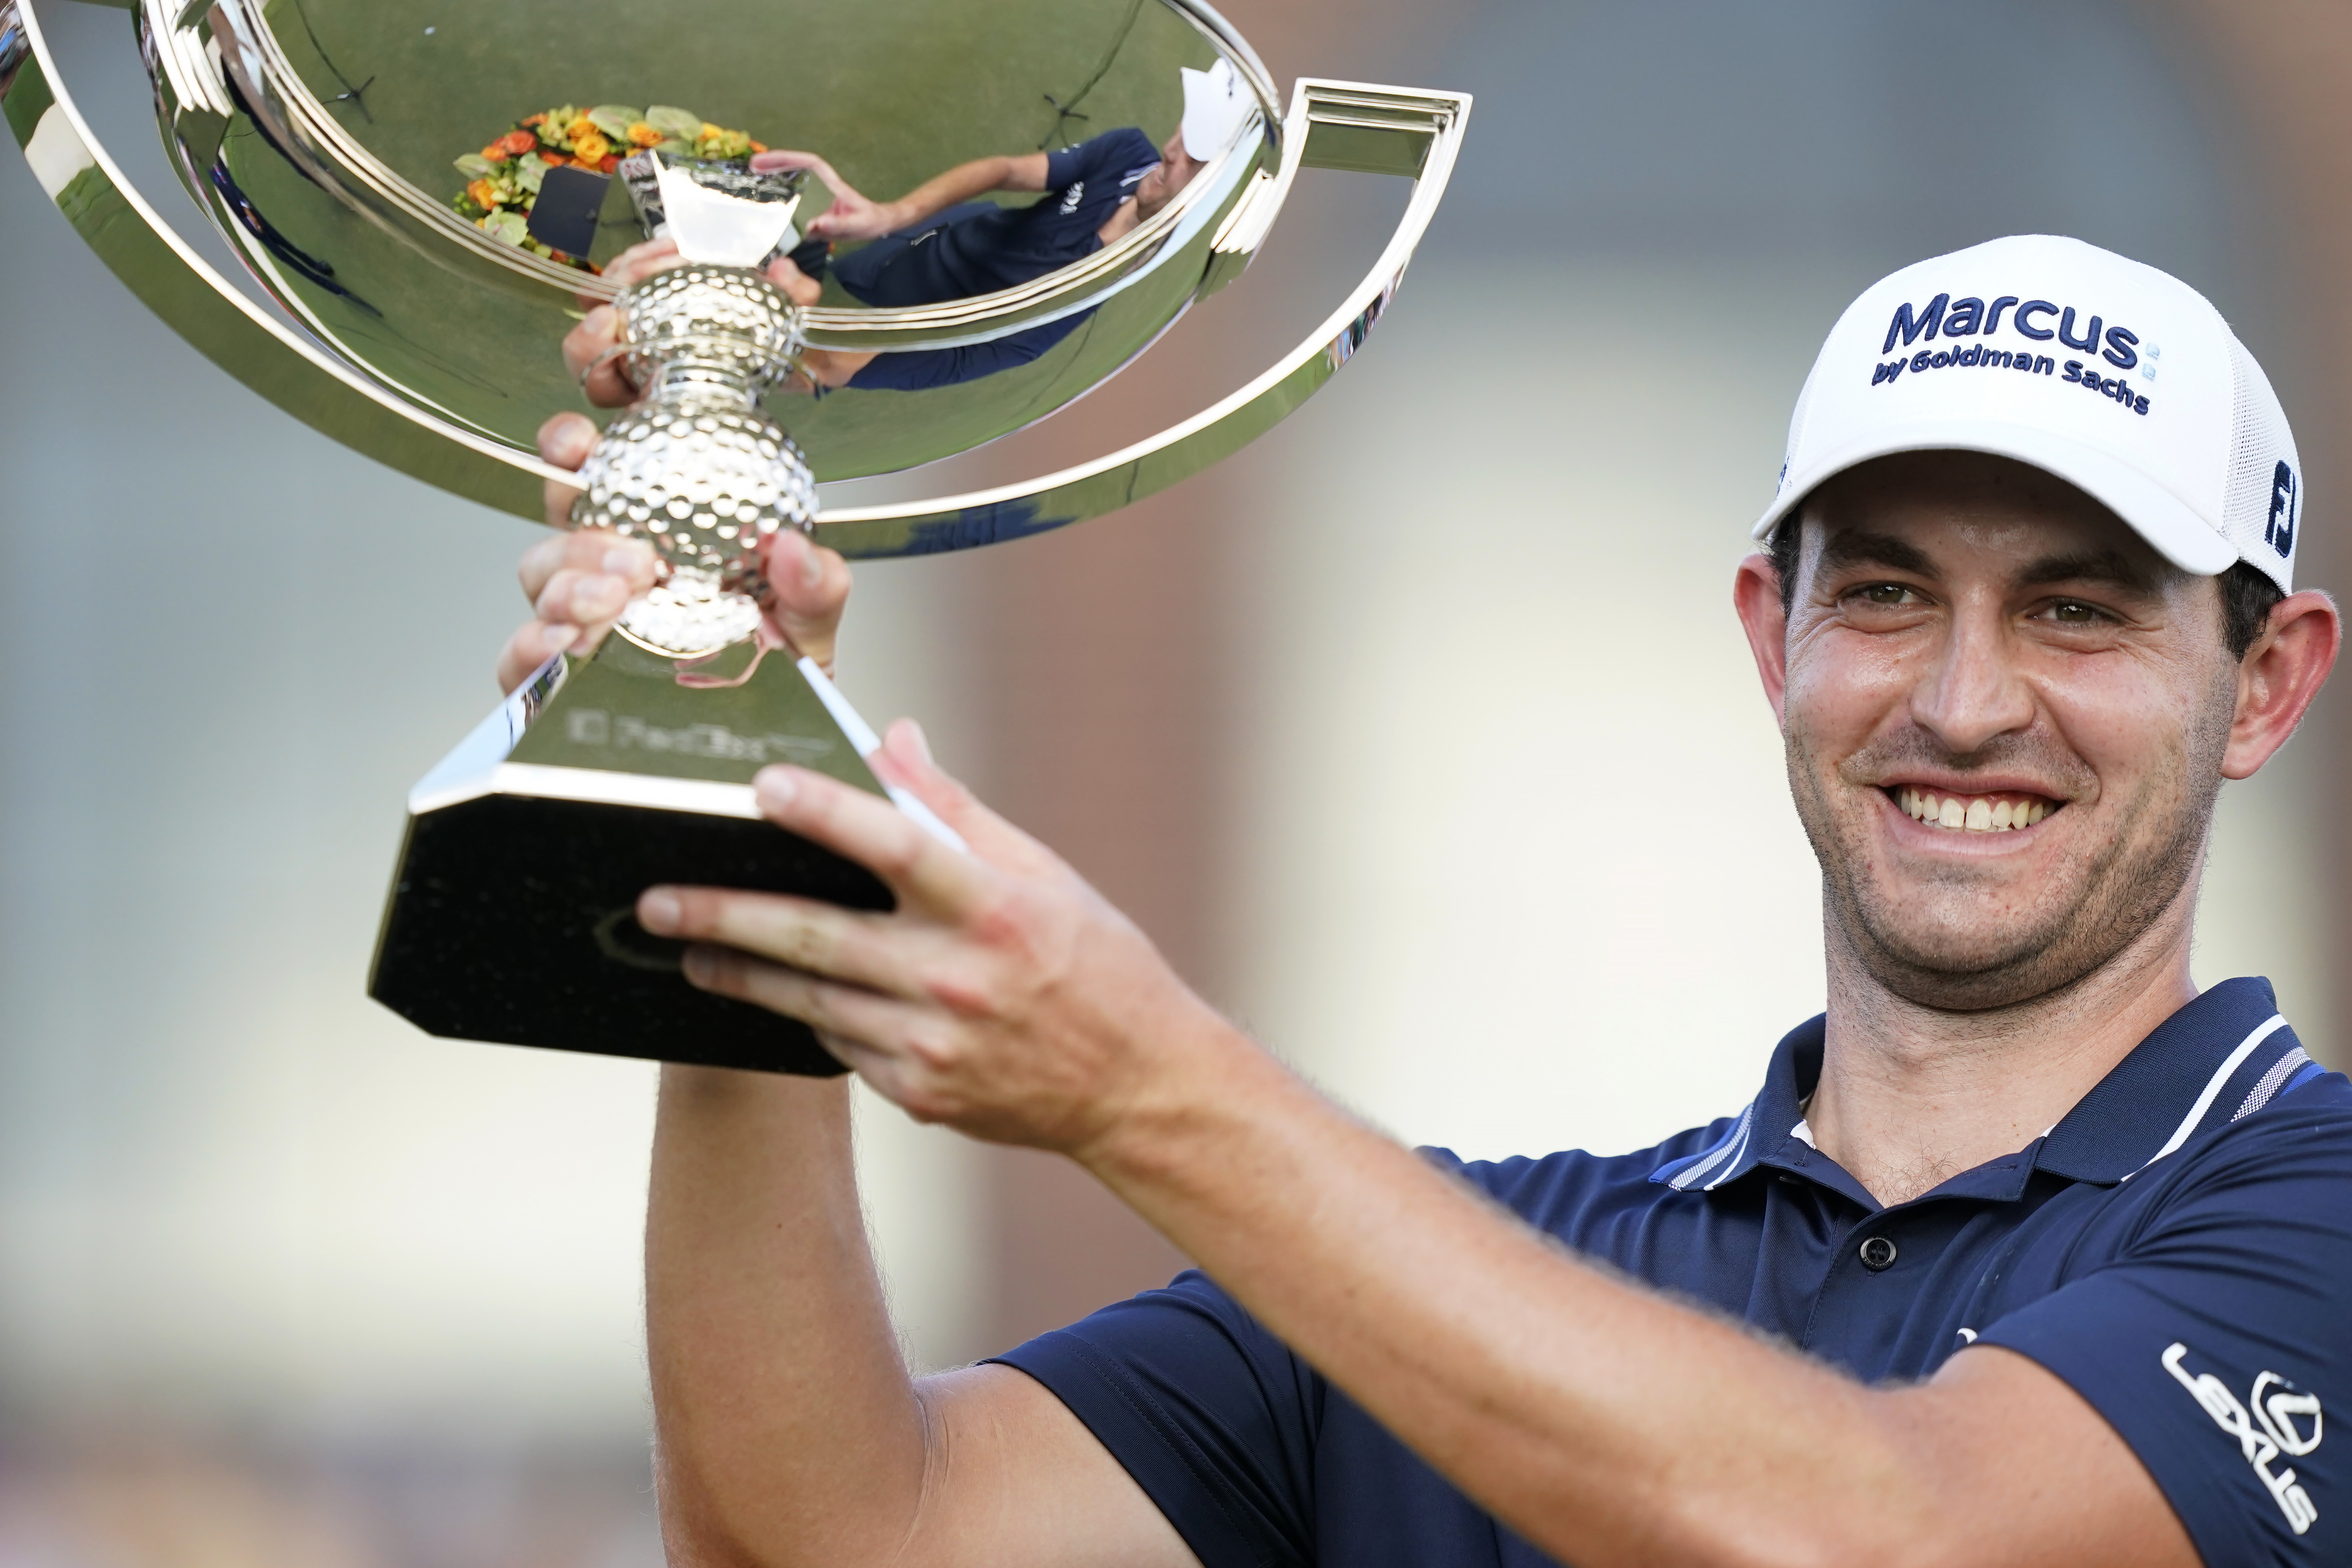 How to Watch the TOUR Championship - PGA Tour Golf Channel, Stream, Preview